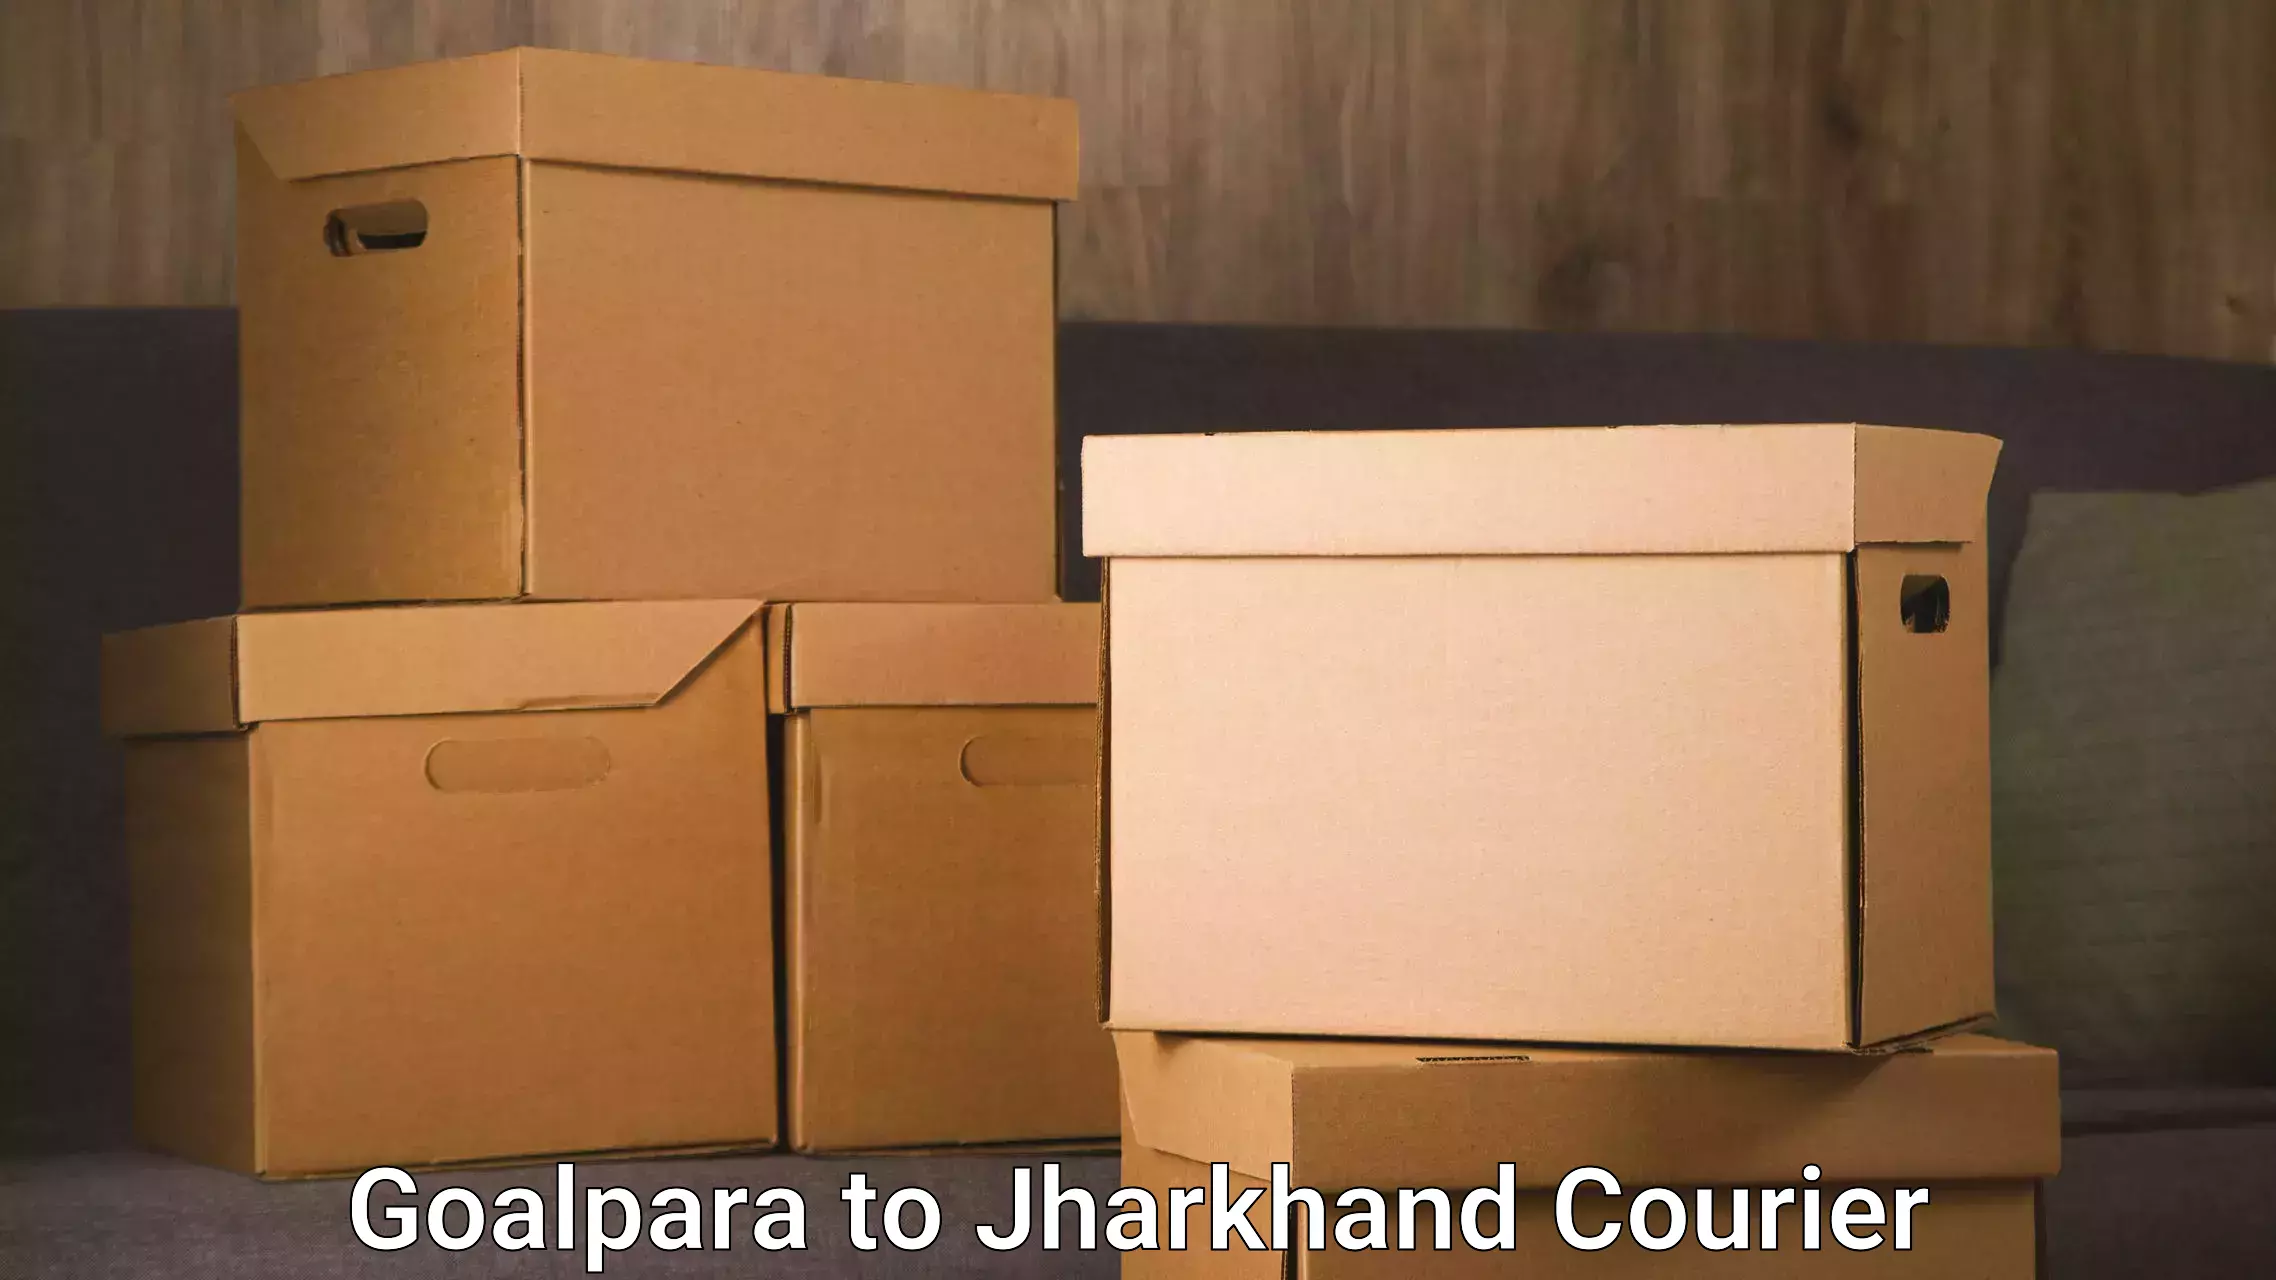 Express delivery network Goalpara to Dhanbad